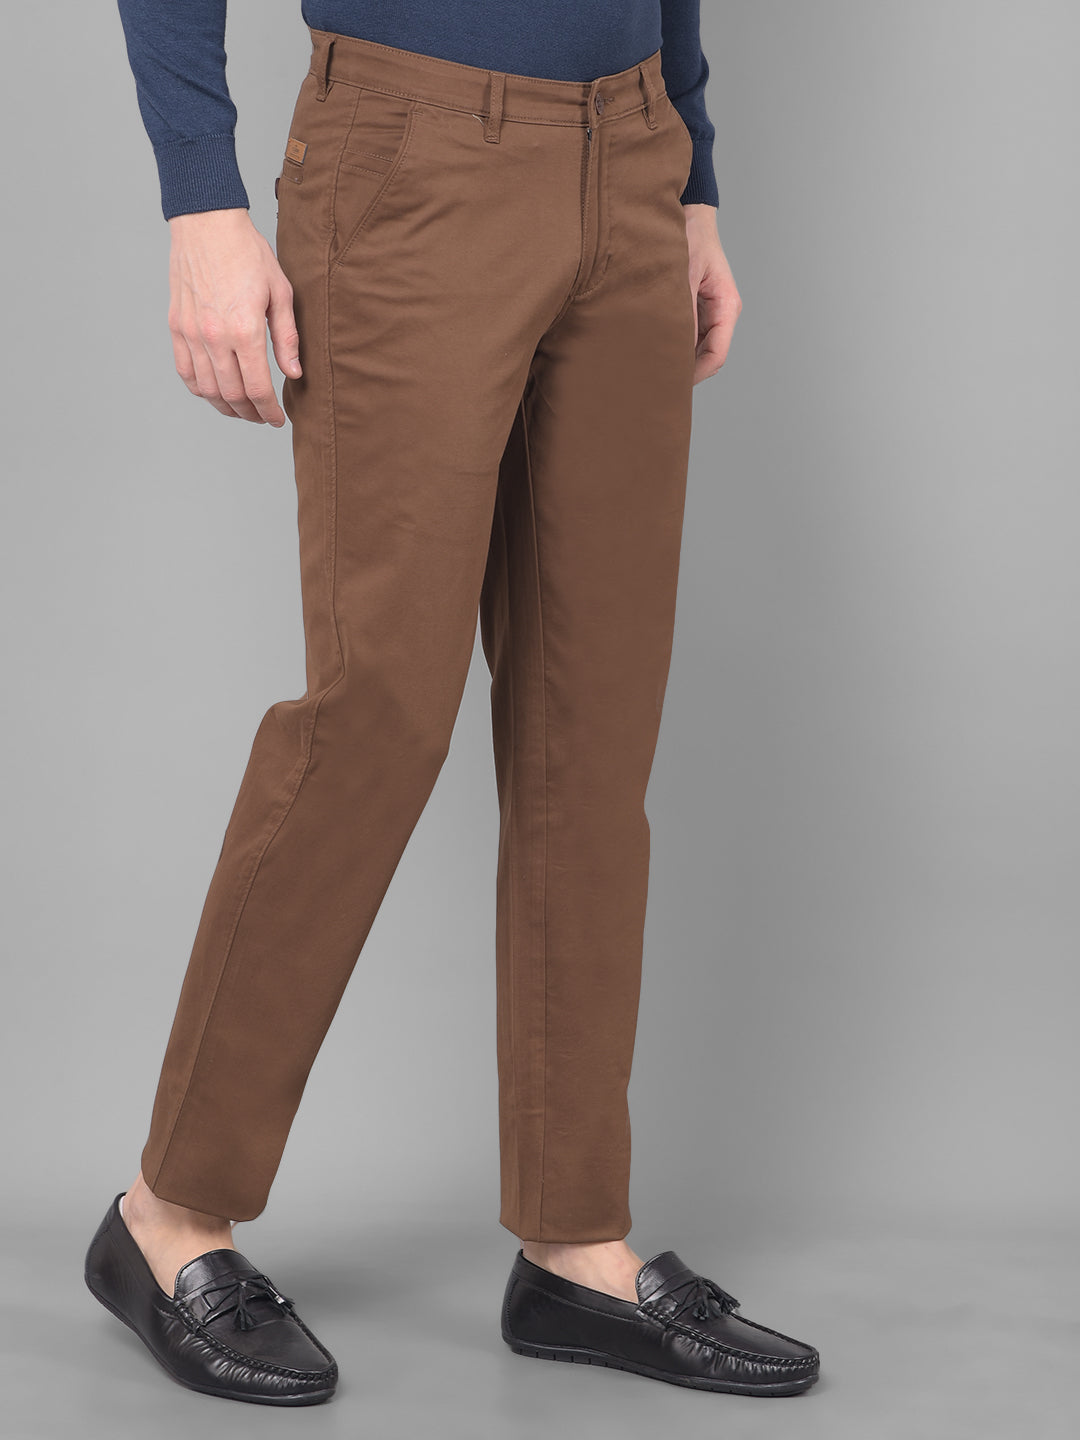 Giant Chinos Are Big Money: 17 Big, Beautiful Pants Worth Your Dollars  Right Now | GQ